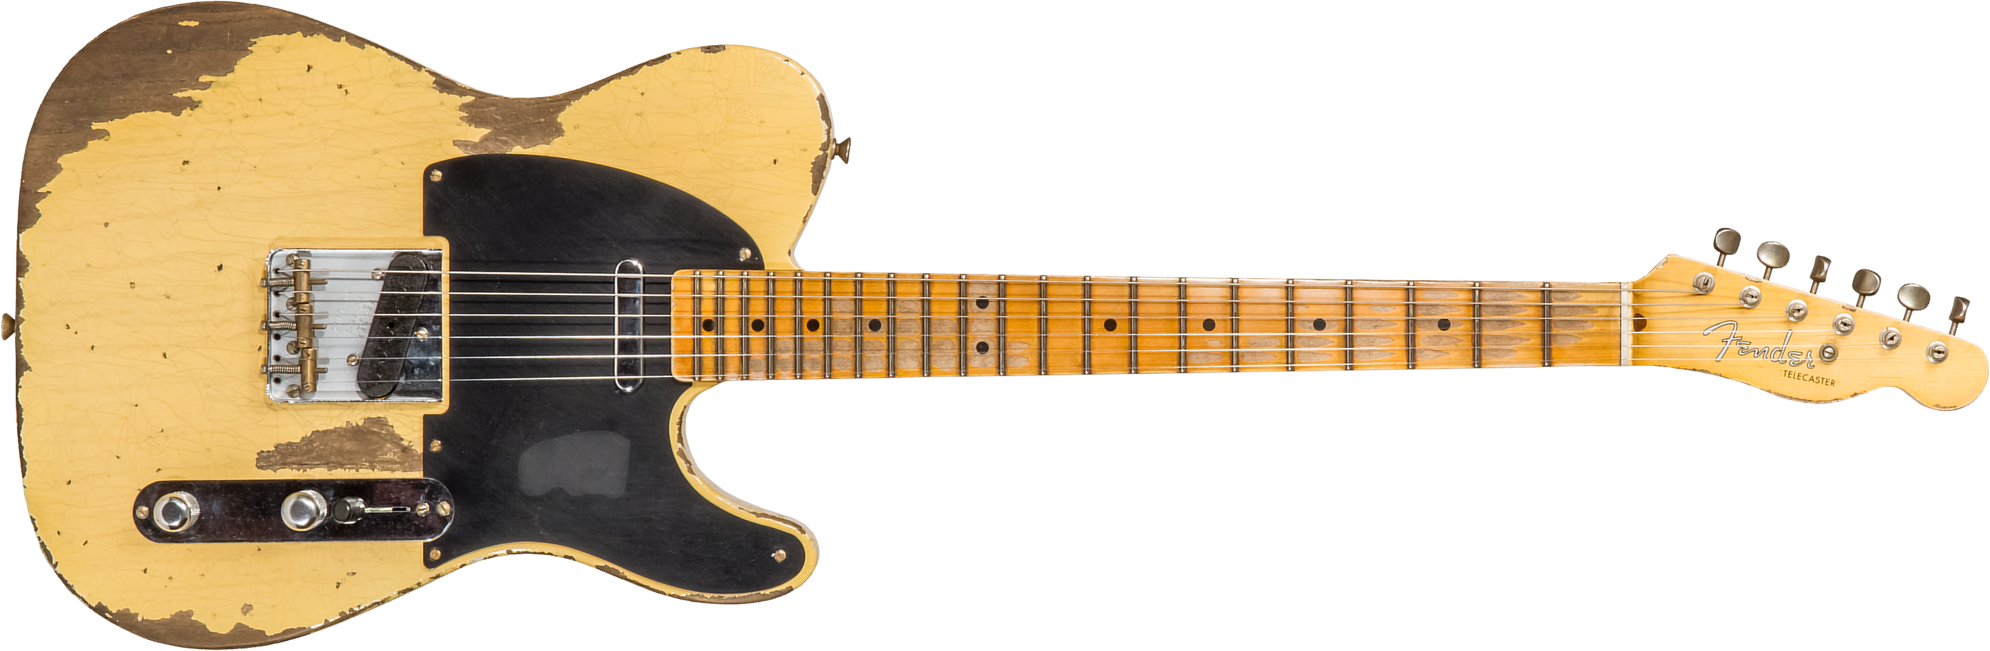 Fender Custom Shop Tele 1952 2s Ht Mn #r131382 - Heavy Relic Aged Nocaster Blonde - Tel shape electric guitar - Main picture